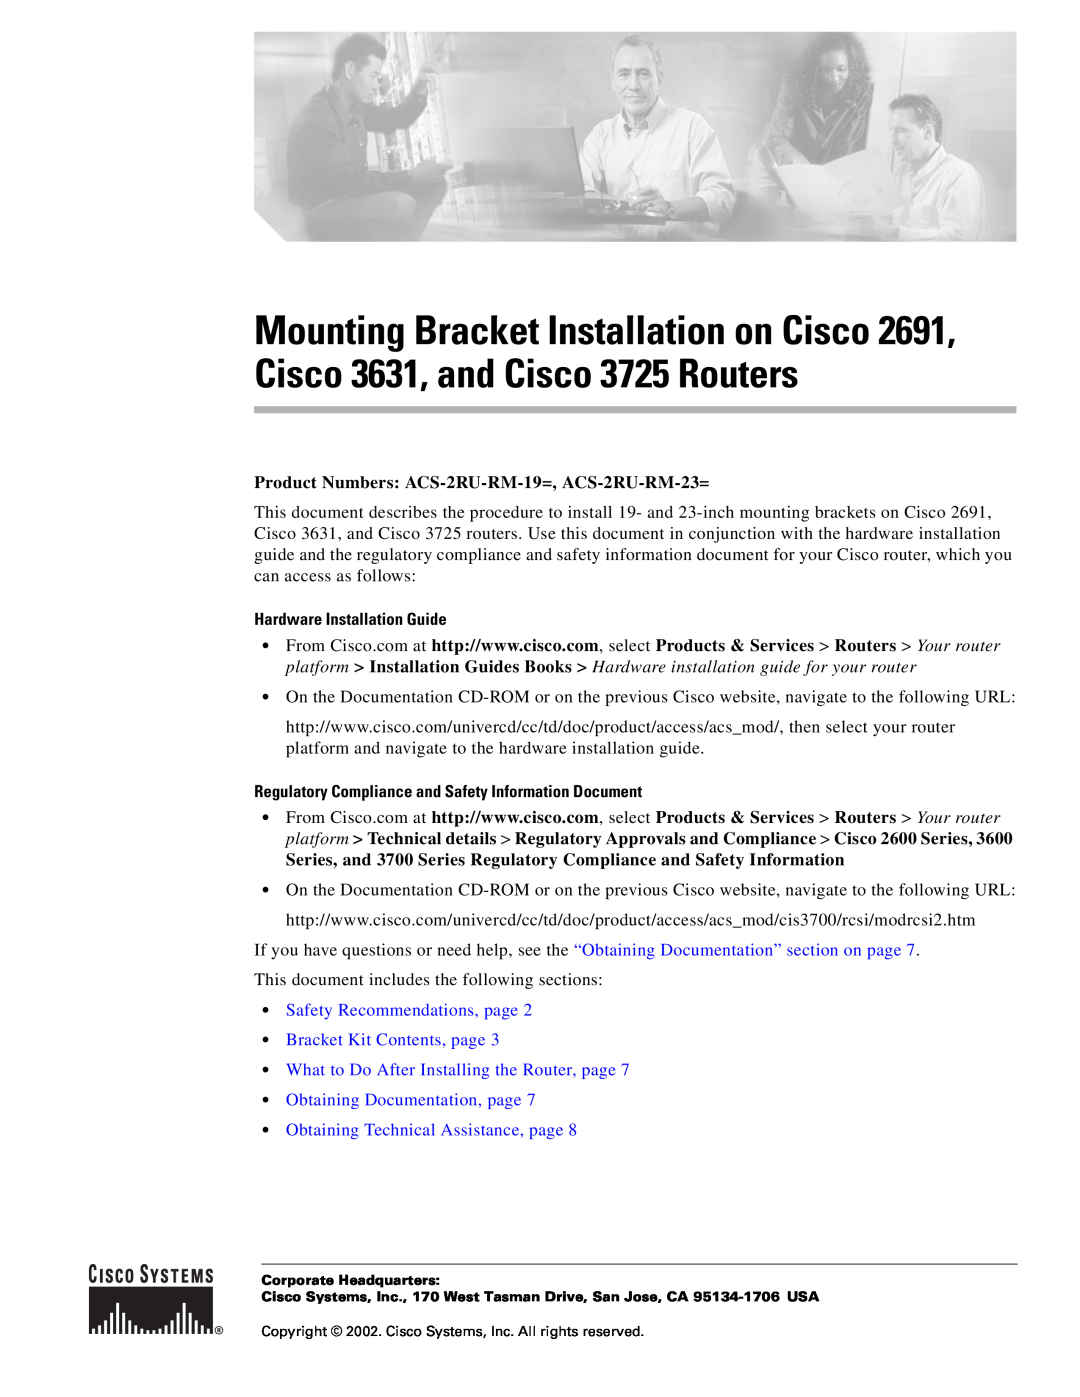 Cisco Systems CISCO3725 manual Hardware Installation Guide, Regulatory Compliance and Safety Information Document 